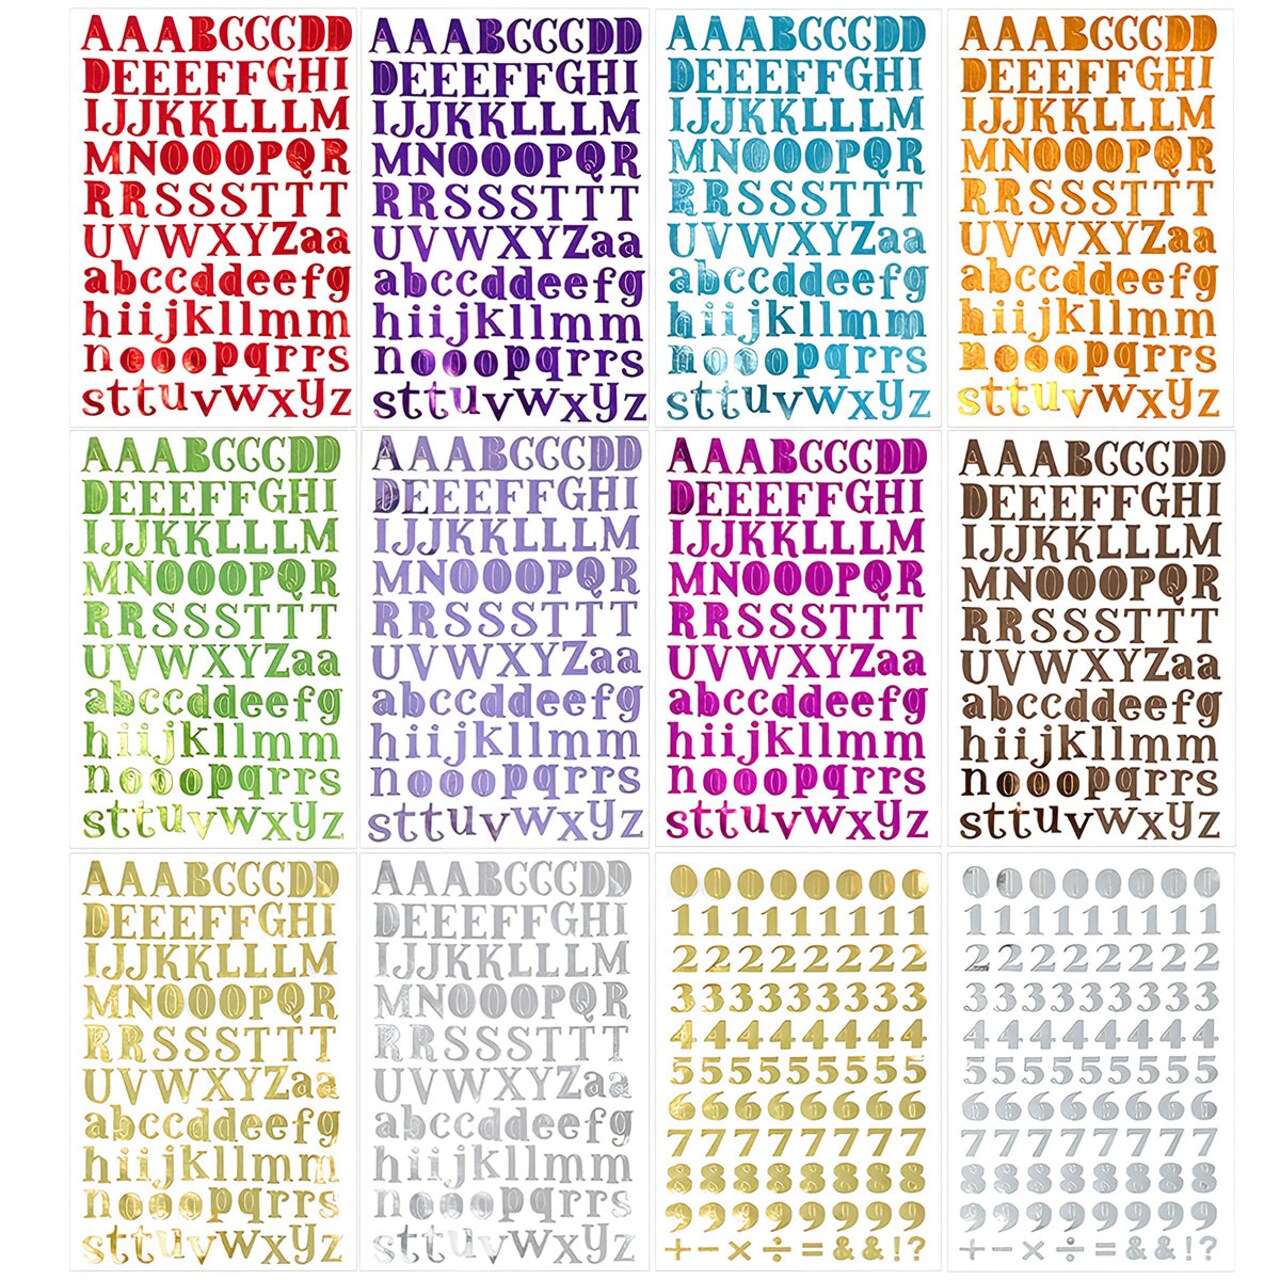 Wrapables Metallic Alphabet Letters and Numbers Adhesive Stickers